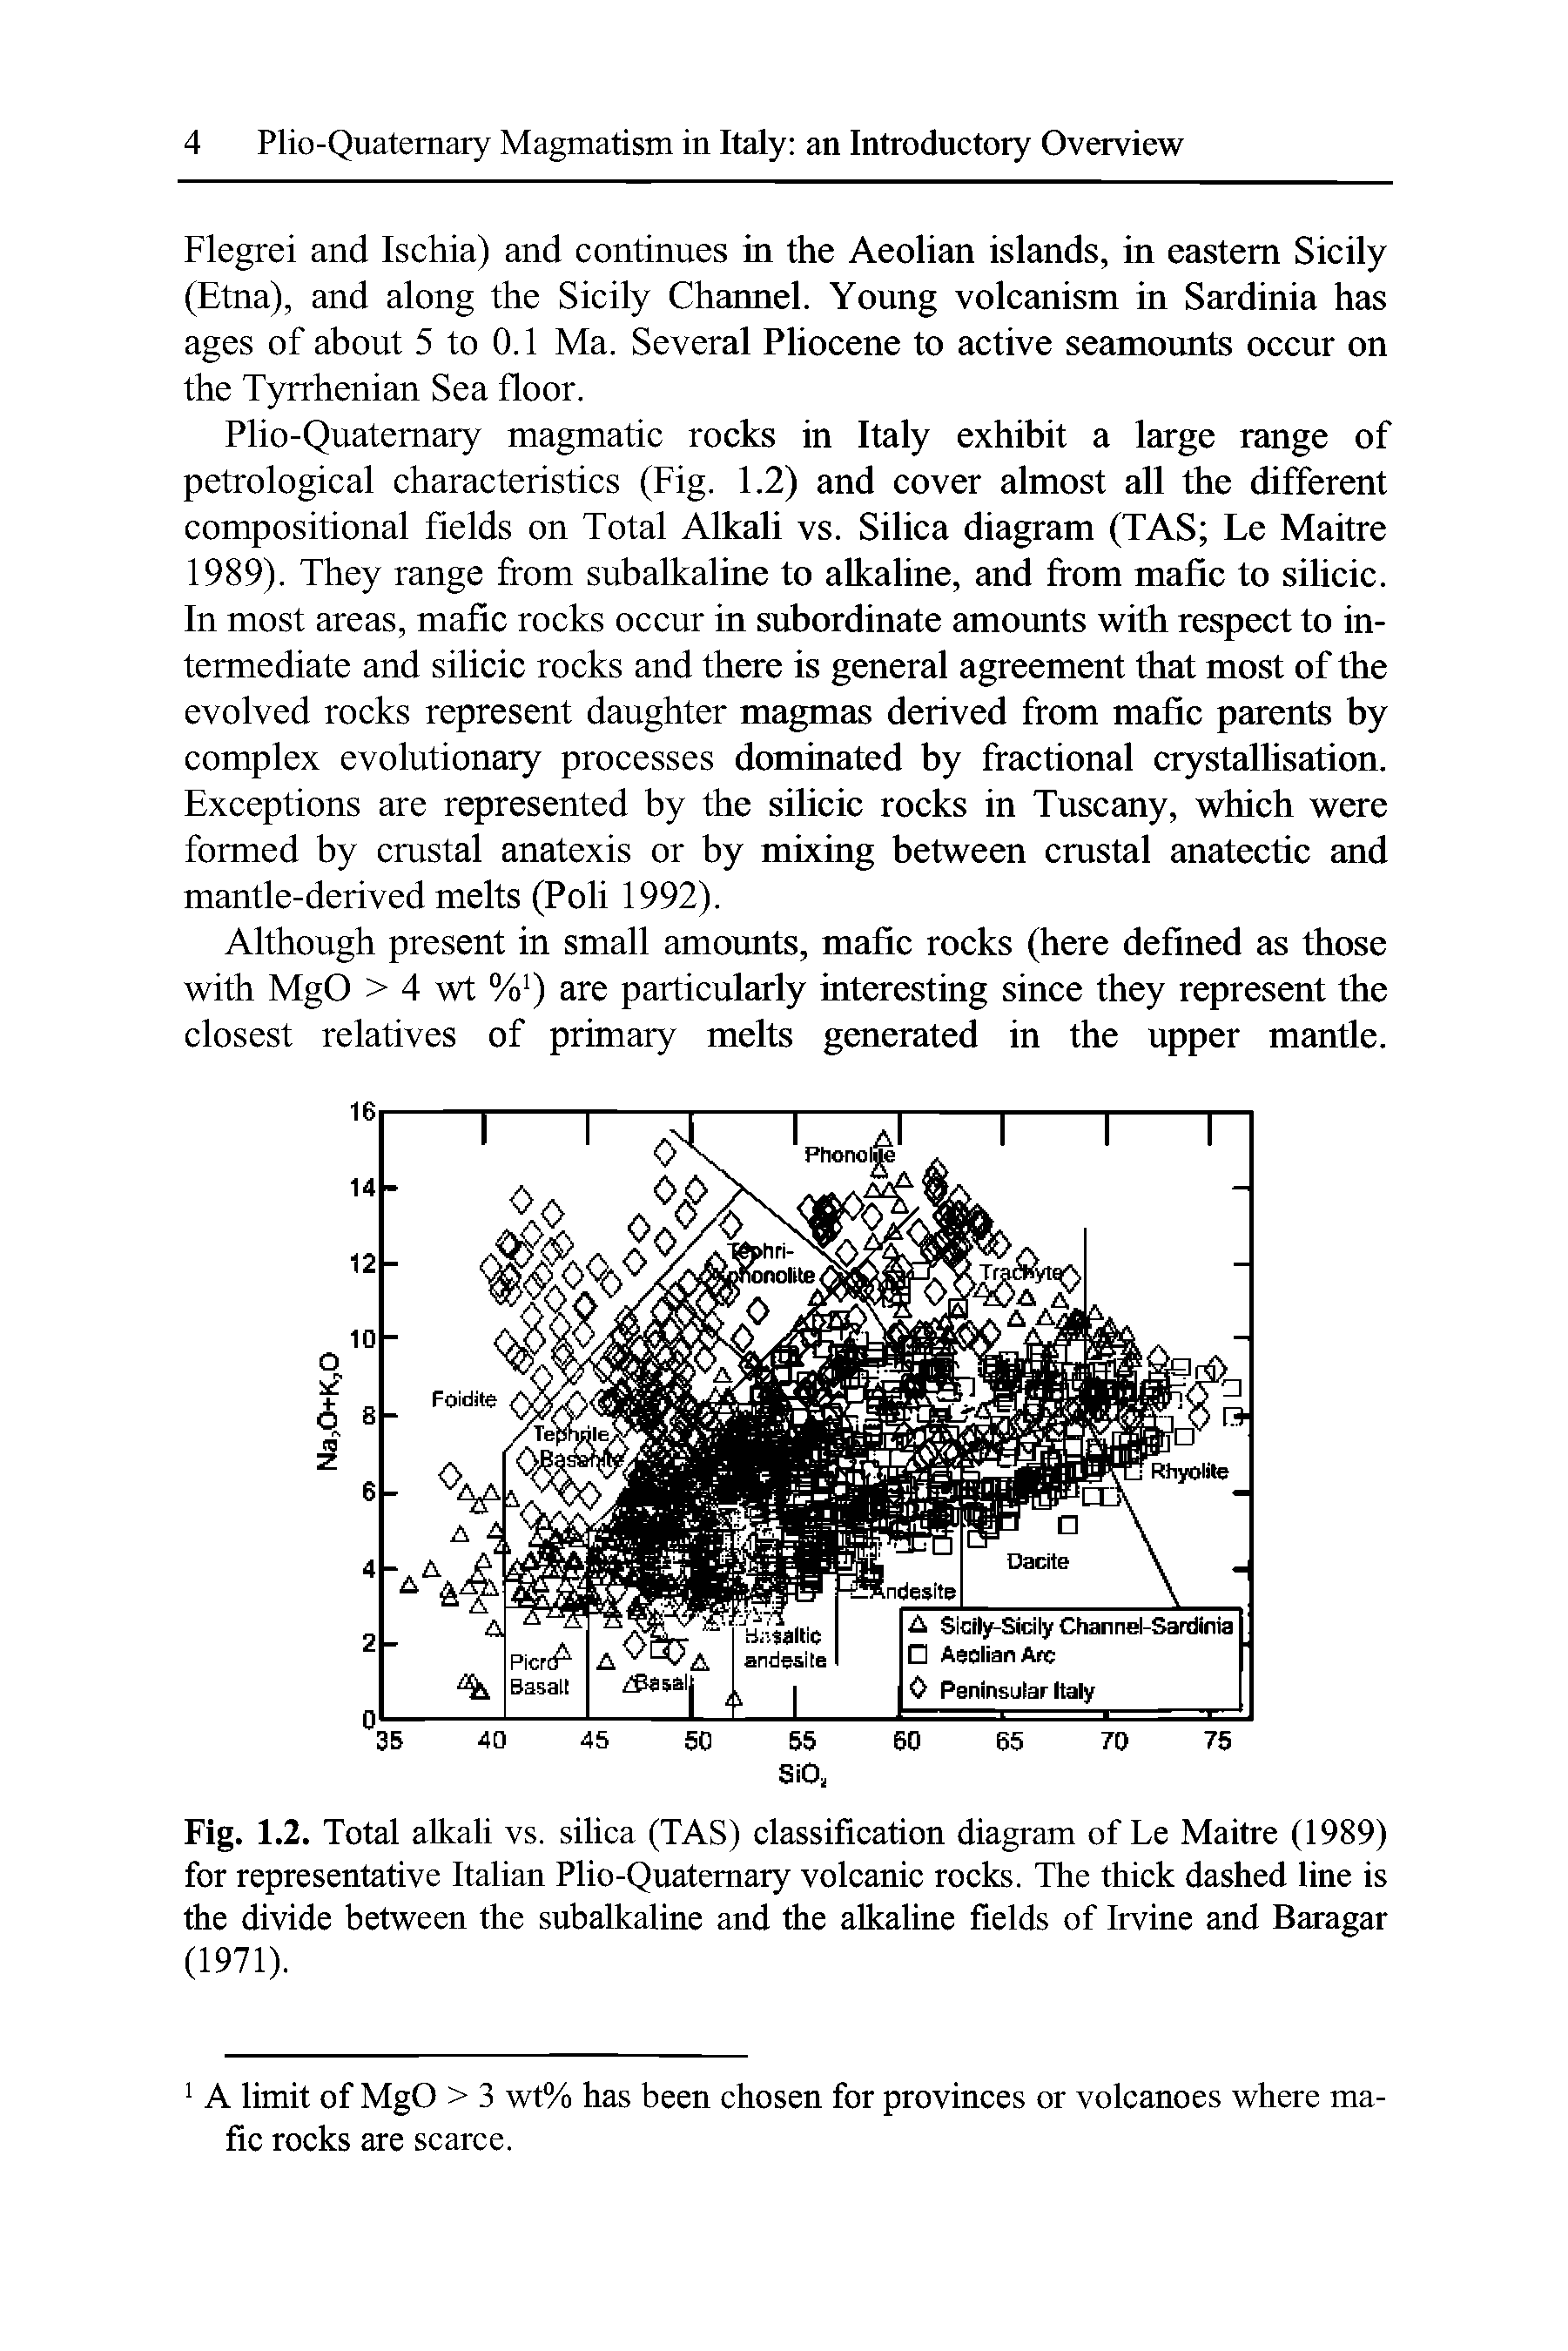 Fig. 1.2. Total alkali vs. silica (TAS) classification diagram of Le Maitre (1989) for representative Italian Plio-Quatemary volcanic rocks. The thick dashed line is the divide between the subalkaline and the alkaline fields of Irvine and Baragar (1971).